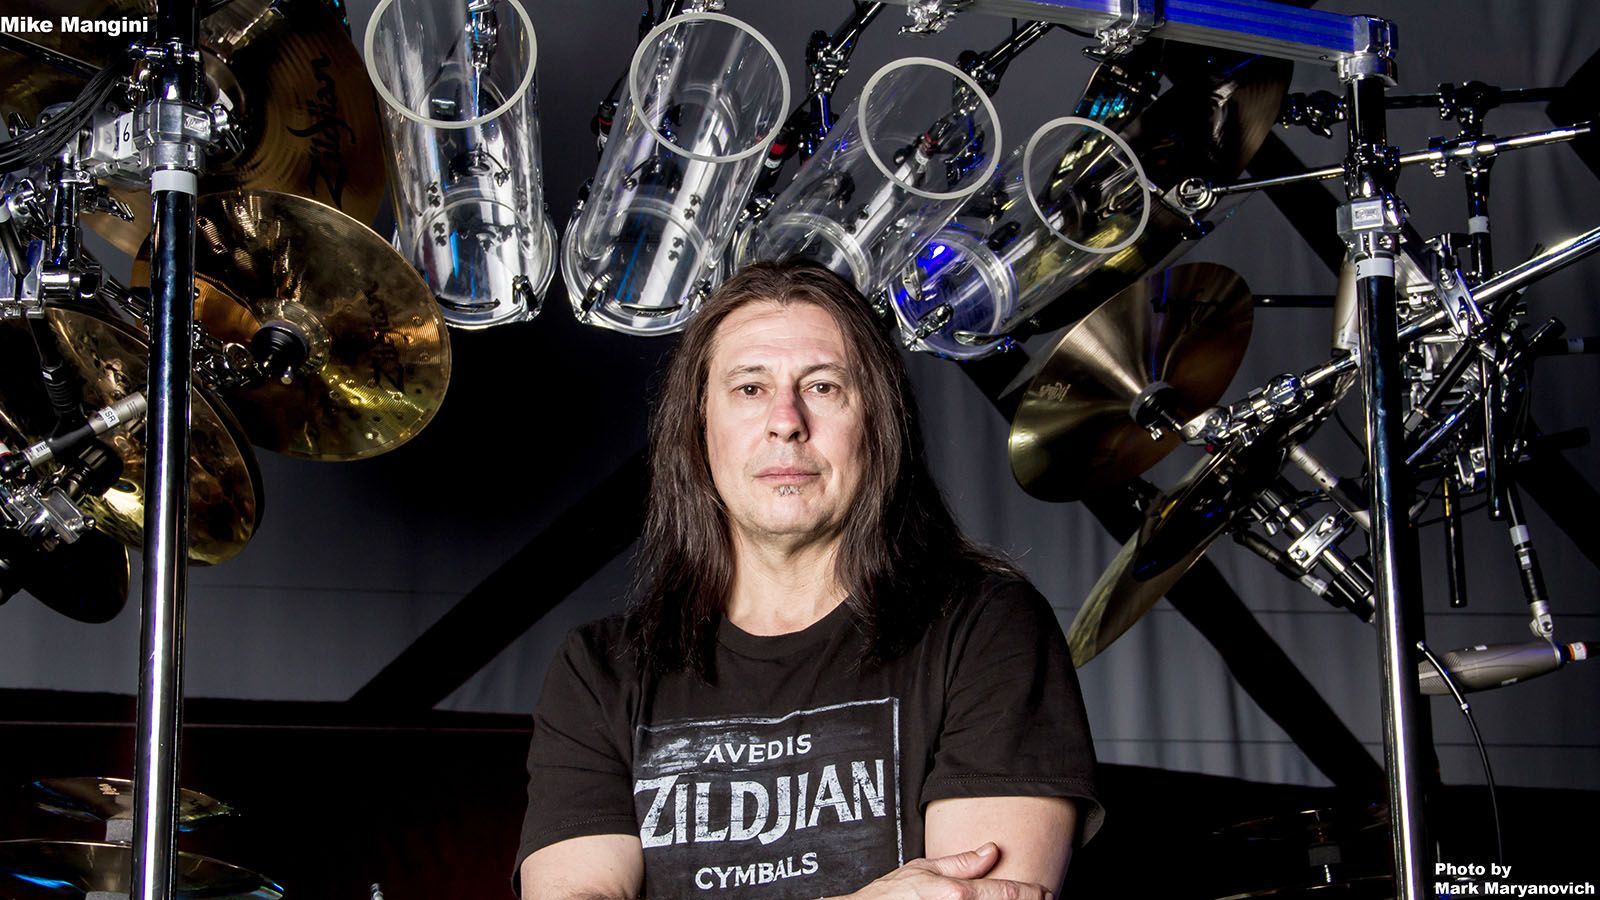 Grammy winner Mike Mangini, who carries the moniker World’s Fastest Drummer, will be among the artists you can interact with during Sweetwater’s inaugural DrumFest on Saturday, May 11.